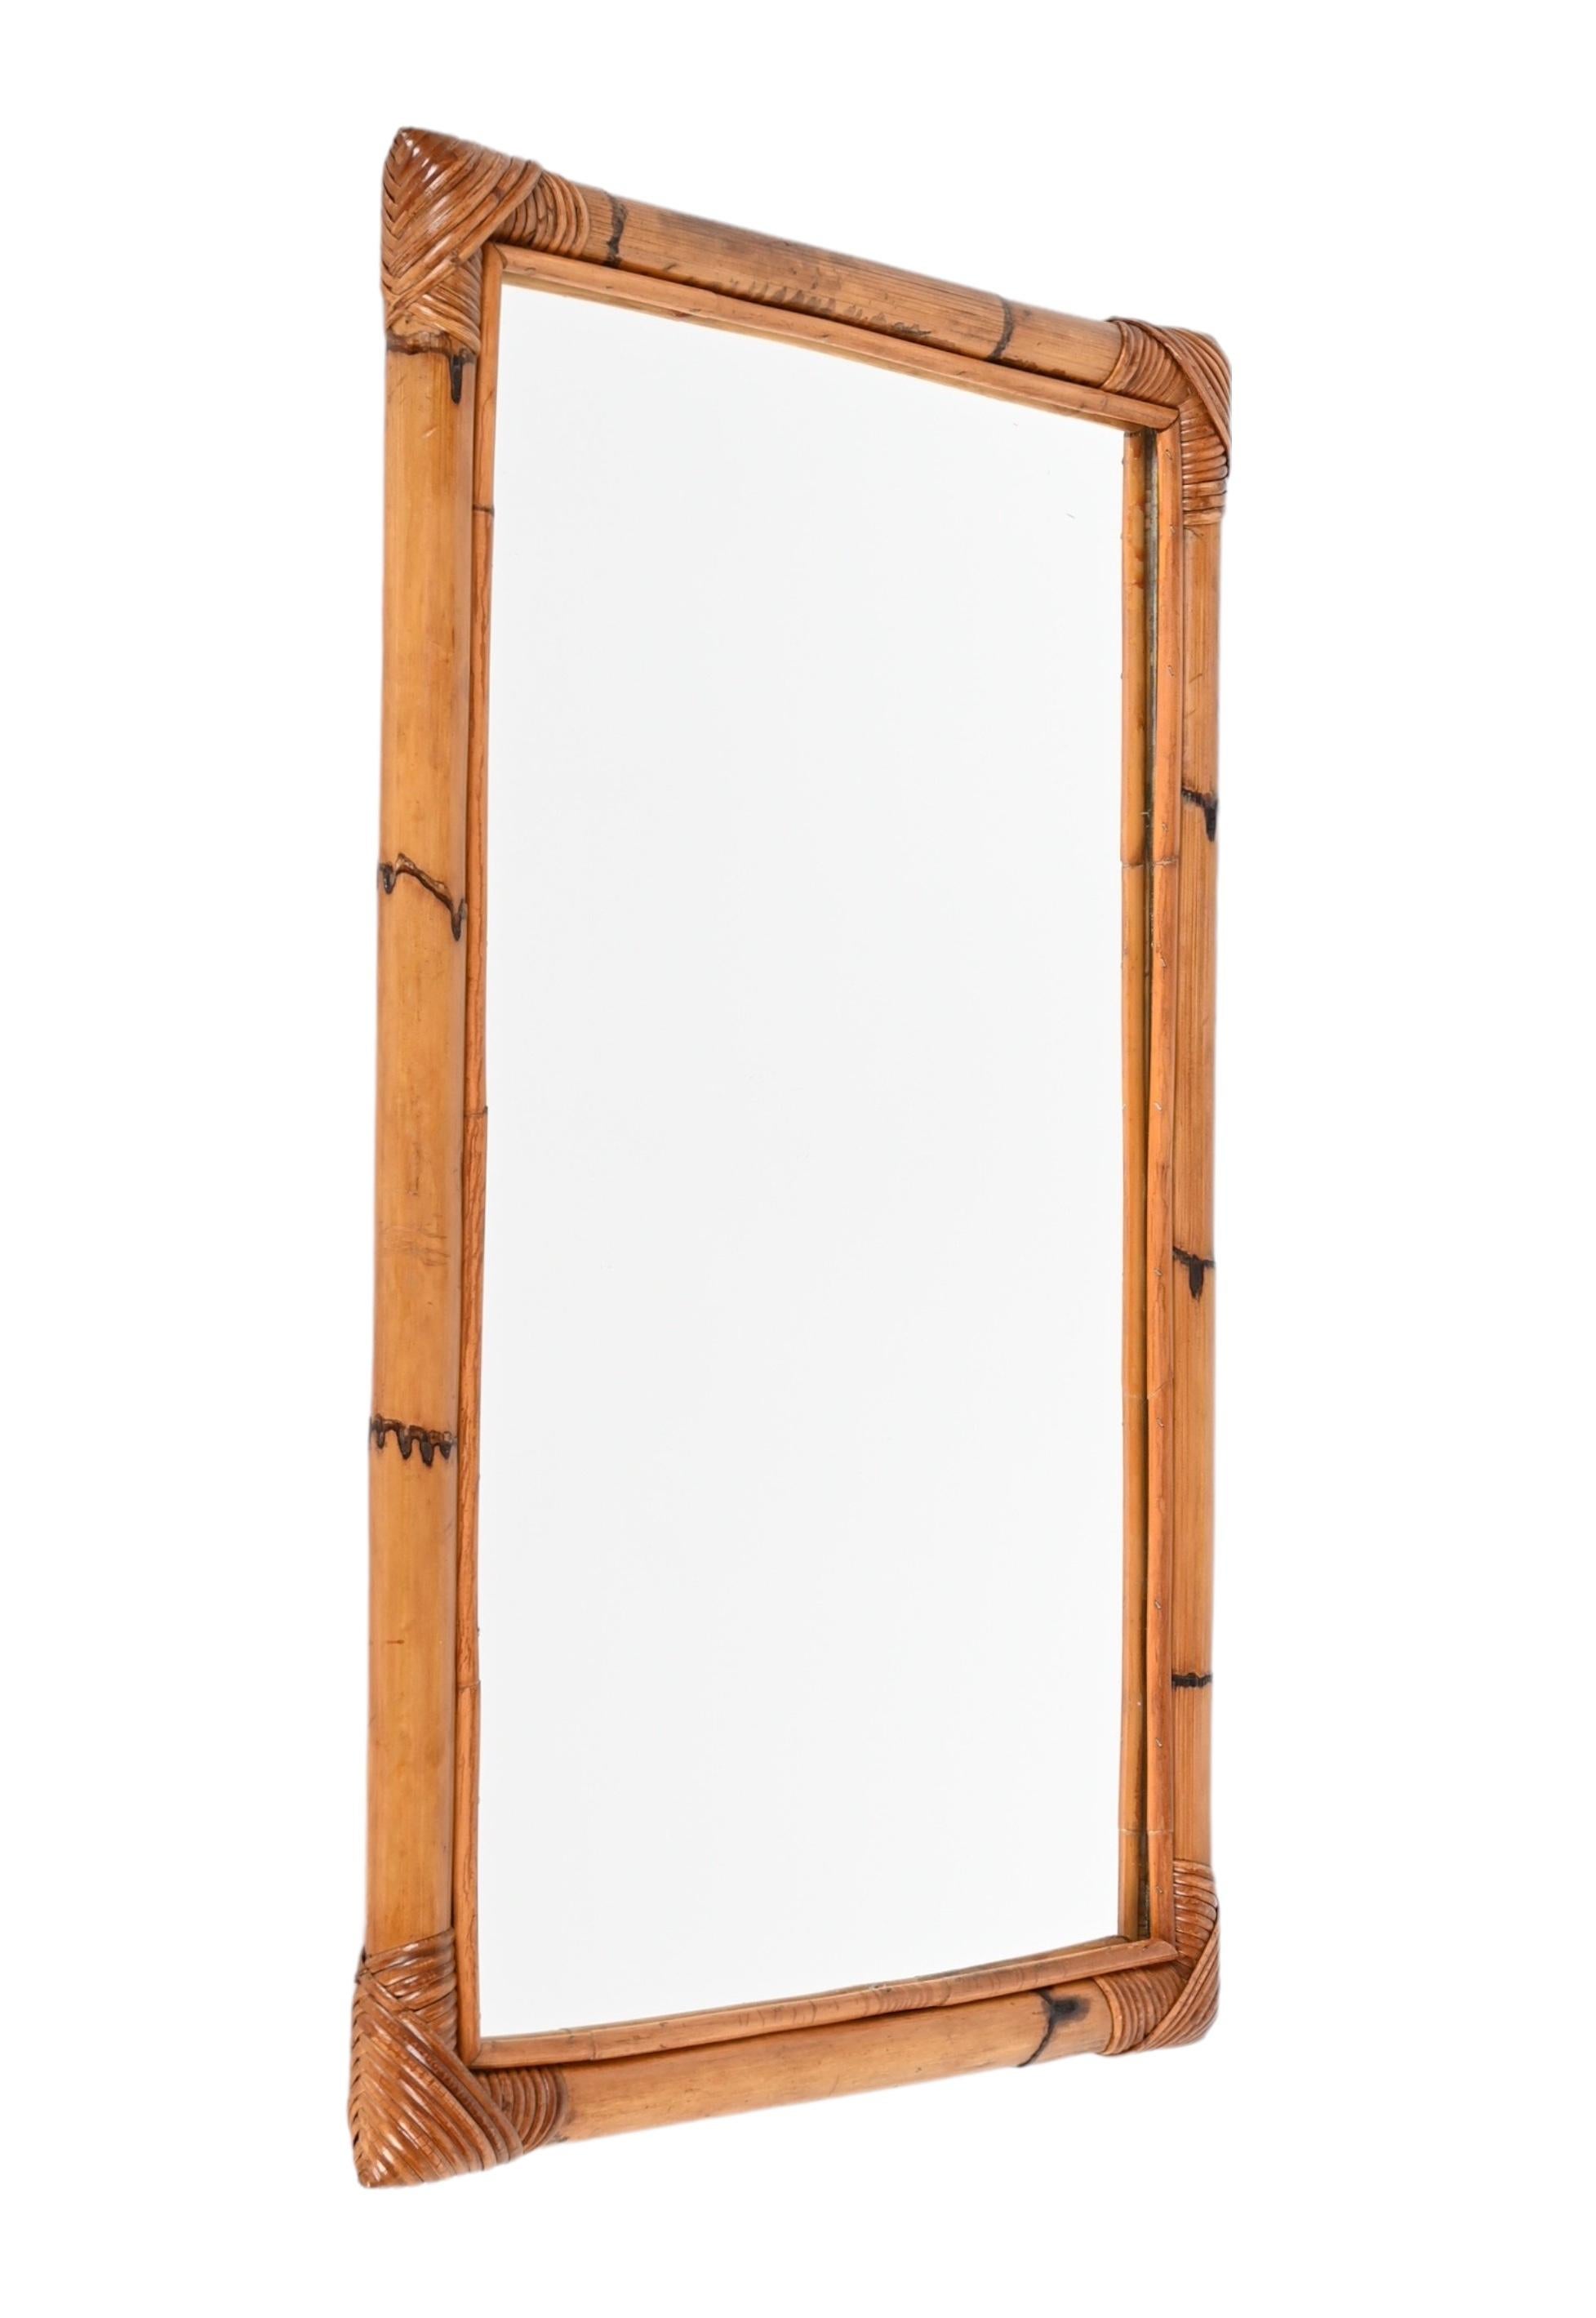 Midcentury Rectangular Italian Mirror with Double Bamboo Cane Frame, 1970s For Sale 6